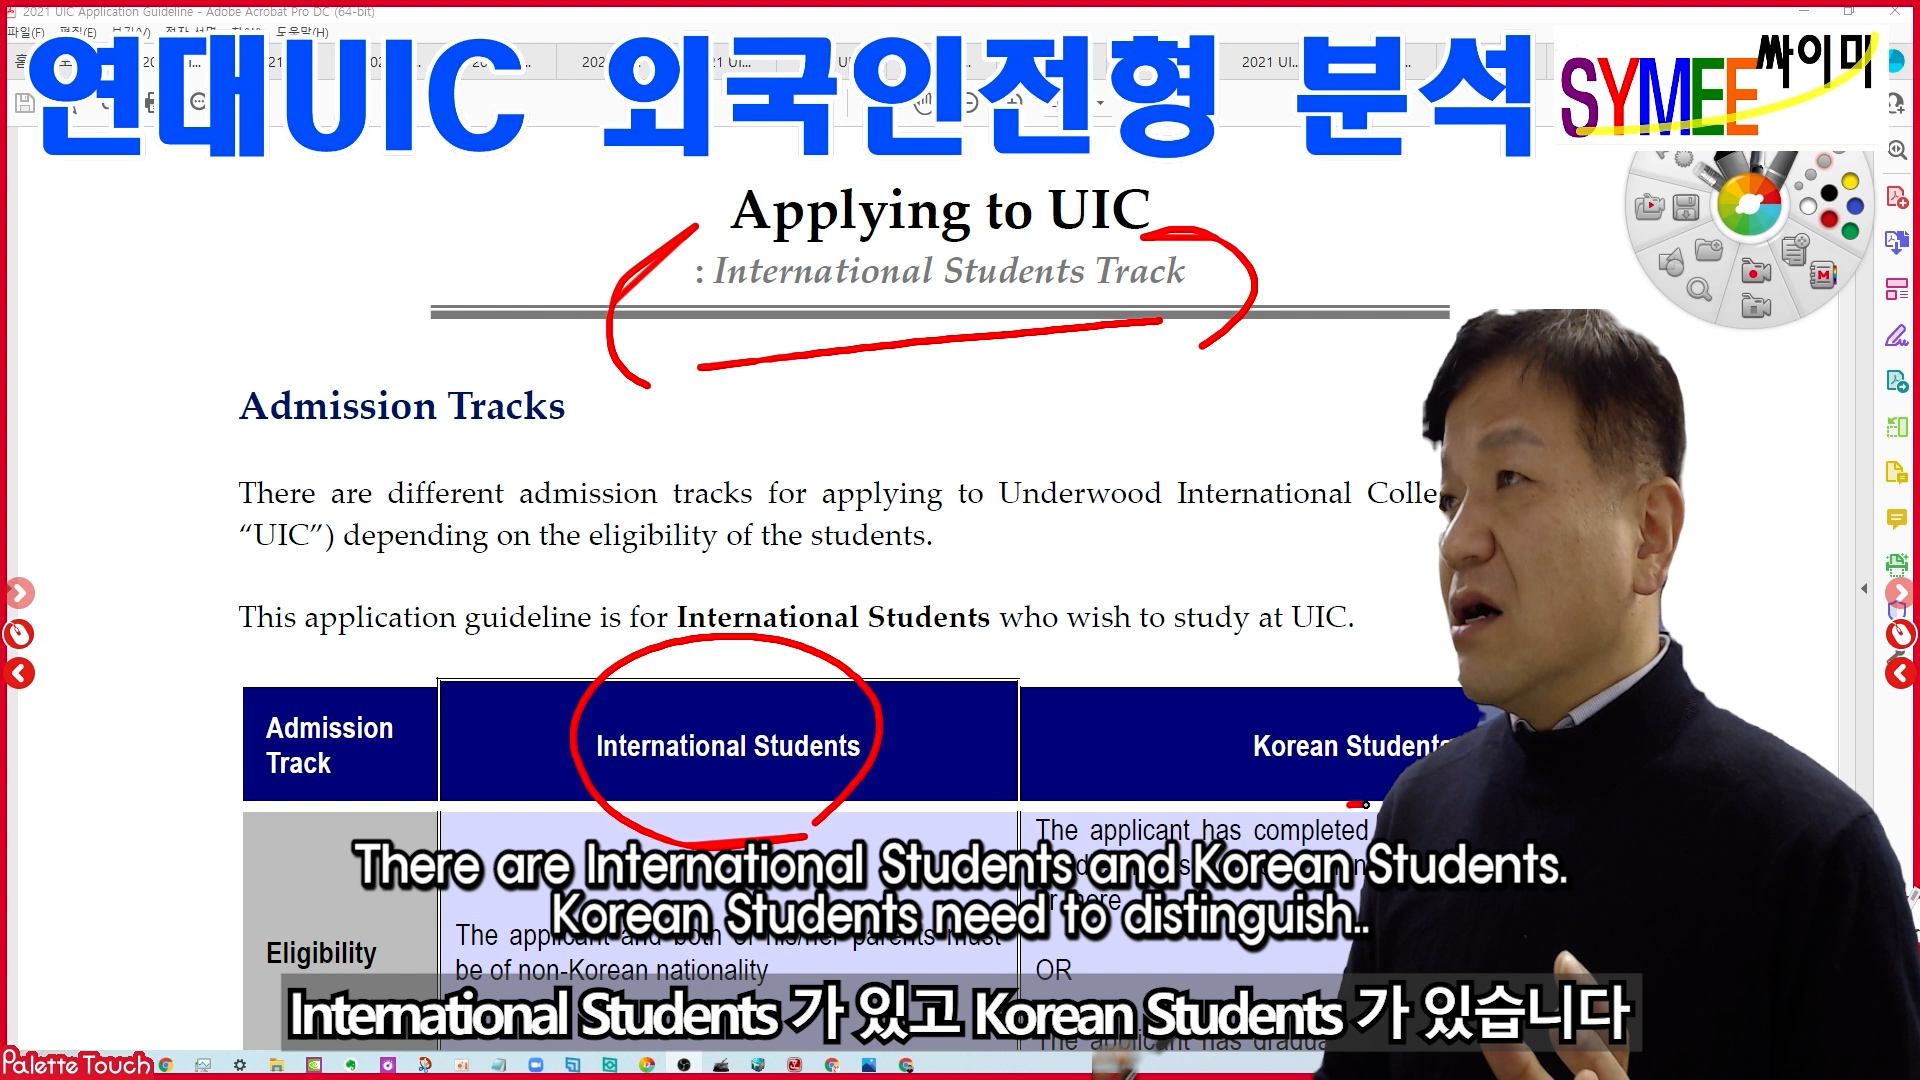 Yonsei Univ. Admission for UIC for Foreign Student 02 Qualifications.00_00_42_08.스틸 002.jpg